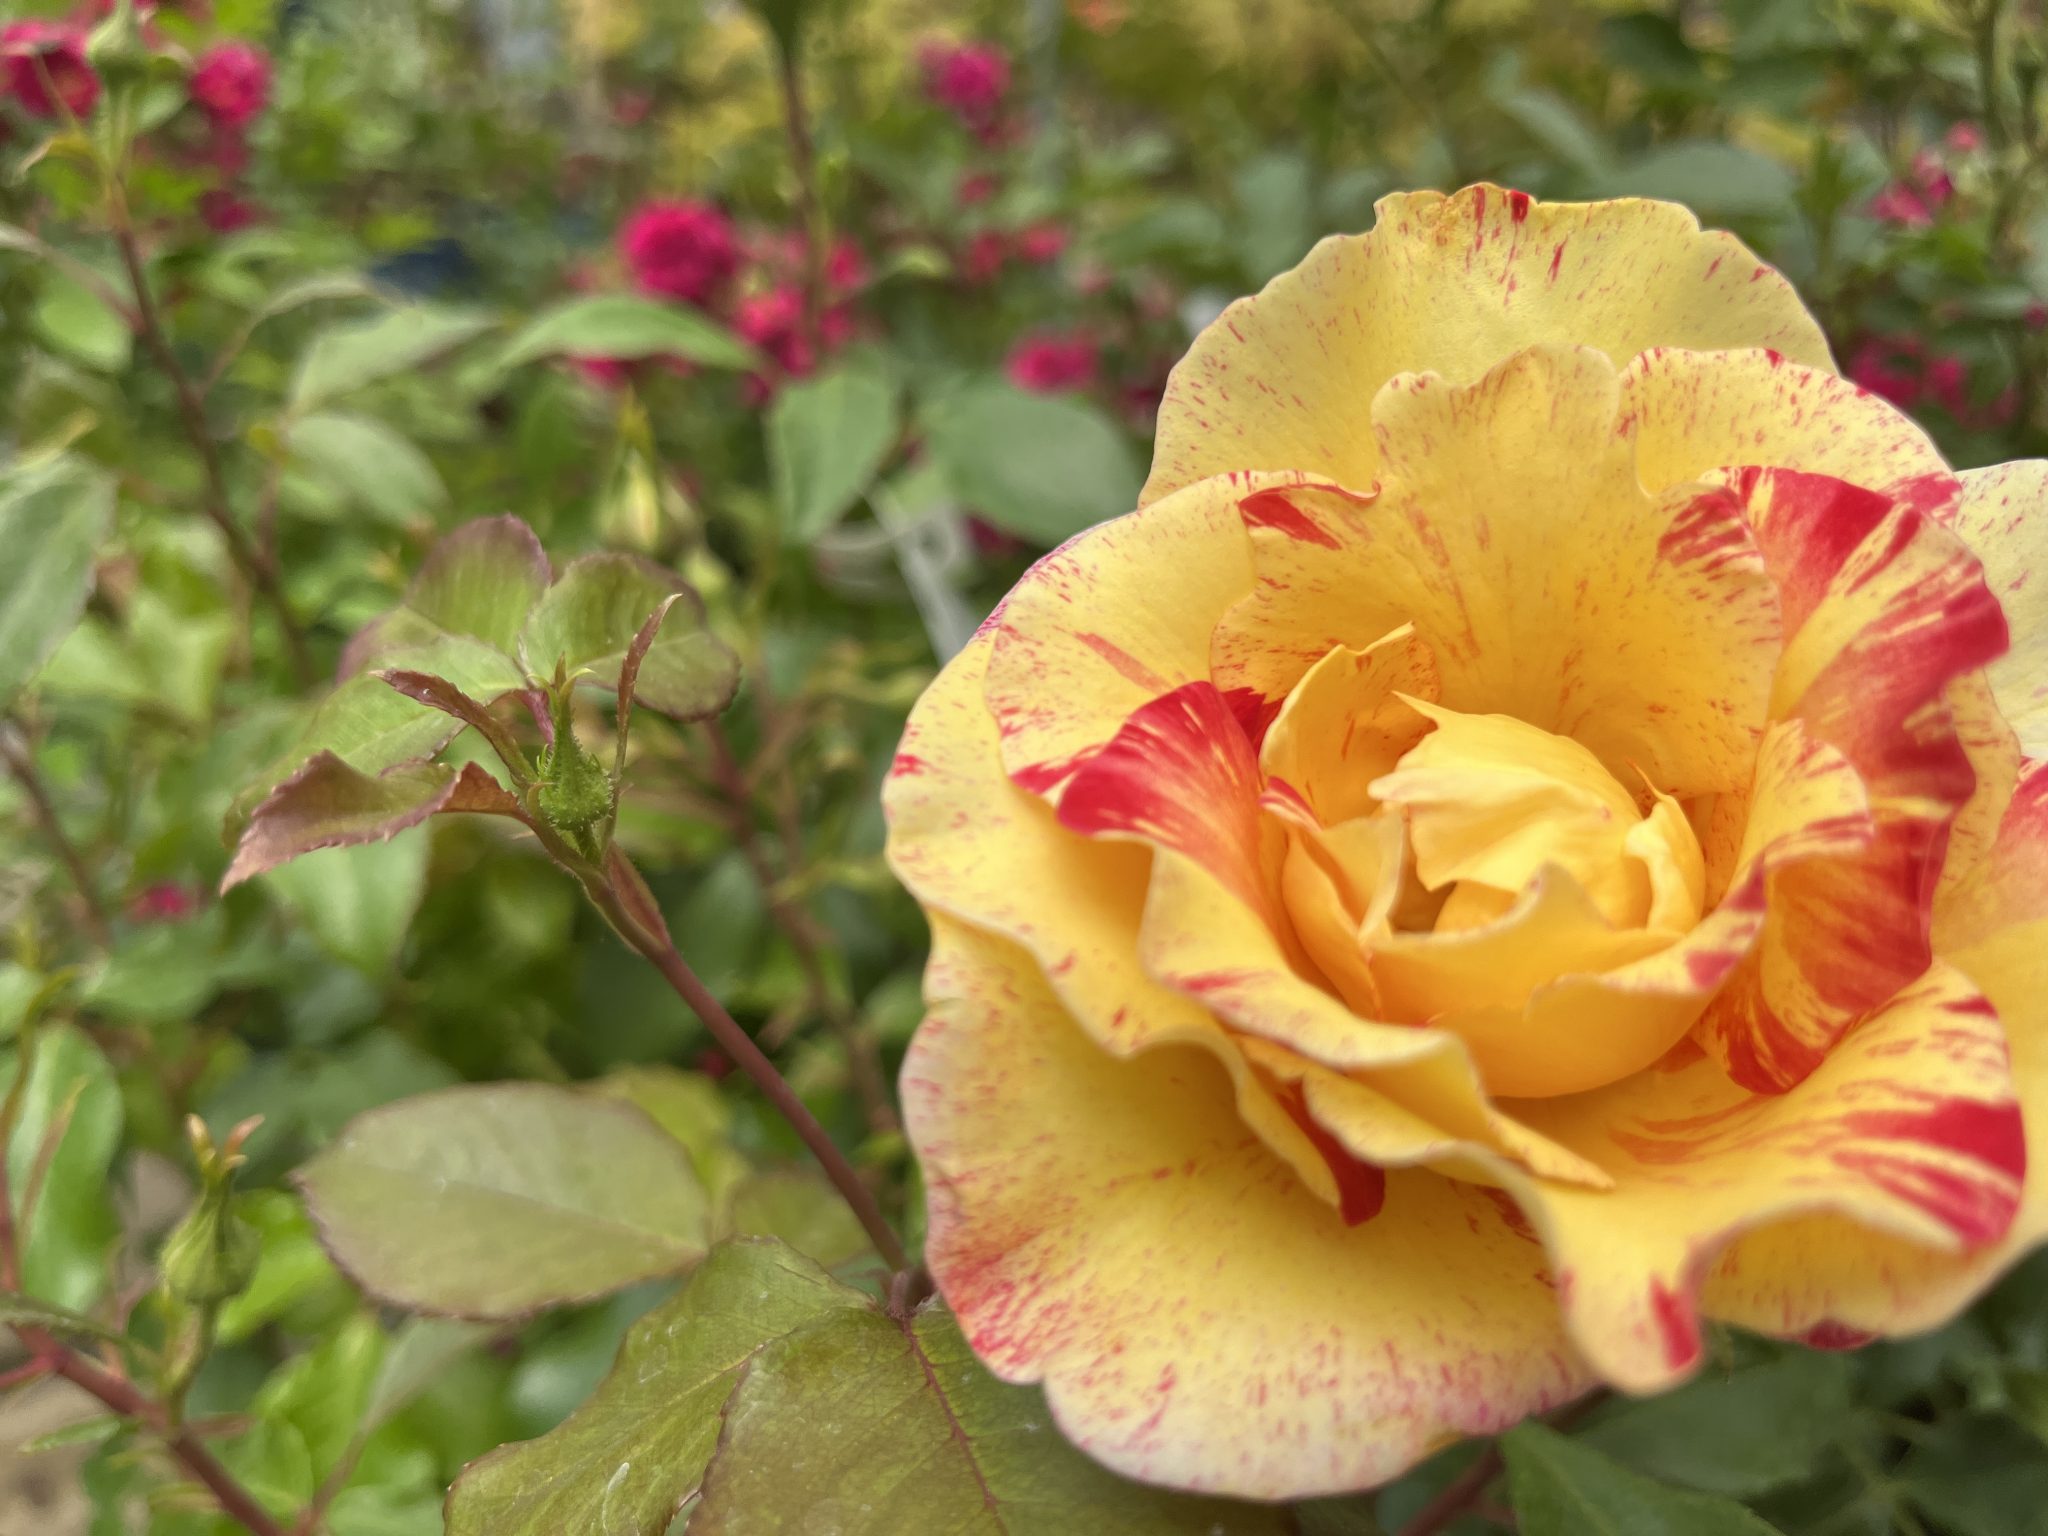 Closeup of a yellow rose with pink stripes.